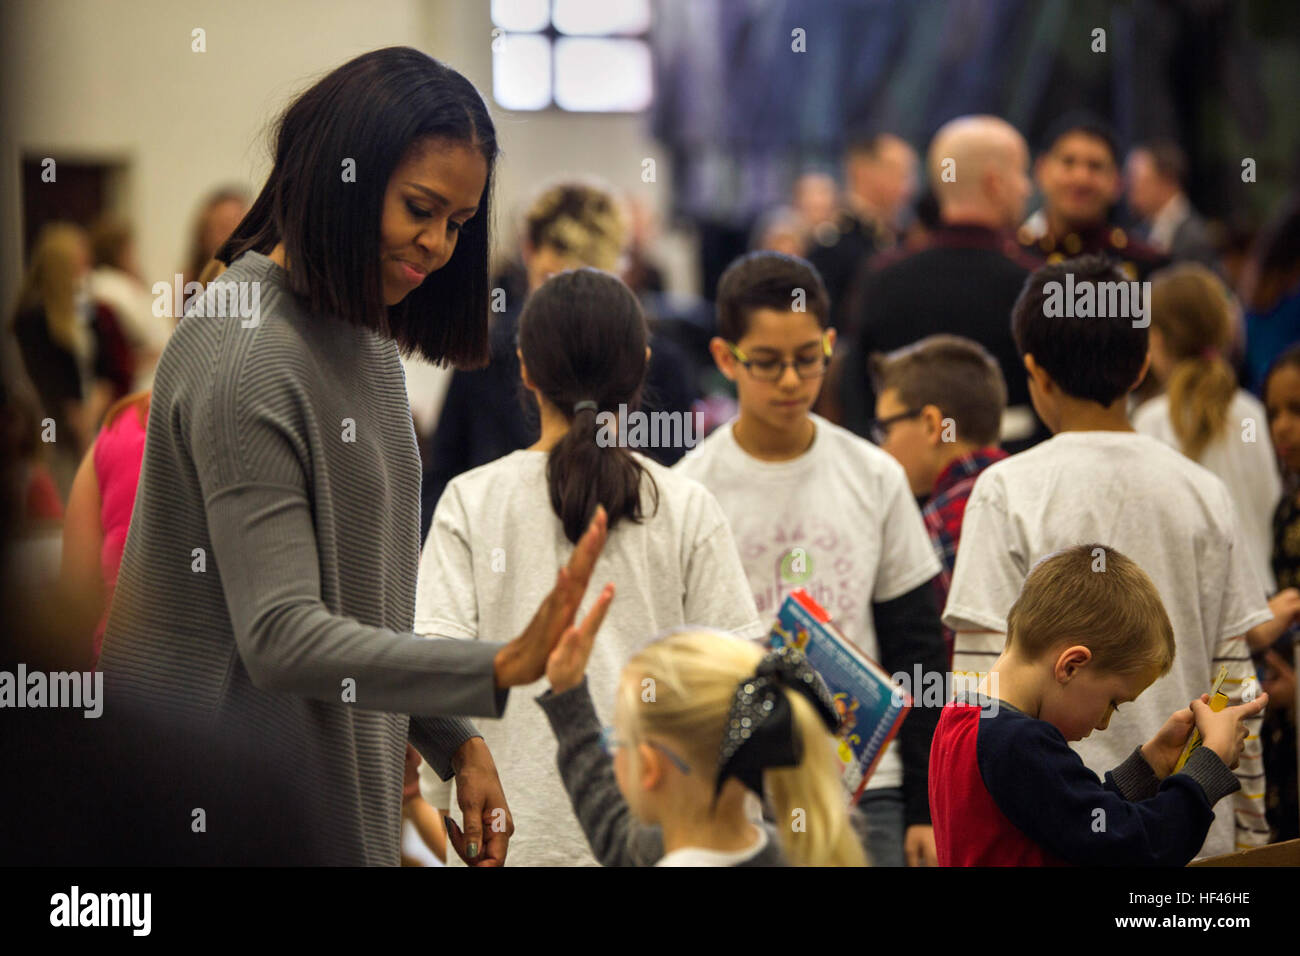 First Lady Michelle Obama high fives a volunteer at a Toys for Tots event at Joint Base Anacostia-Bolling, Washington D.C., Dec. 7, 2016. The Marine Corps Reserve Toys for Tots program was created in 1947 and provides new, unwrapped toys to millions of children across the country every year. The first lady is an avid supporter of Toys for Tots and has been a spokesperson for its mission for the last eight years. (U.S. Marine Corps photo by Lance Cpl. Jamie L. Arzola) Michelle Obama's last Toys for Tots as FLOTUS 161207-M-TB374-004 Stock Photo